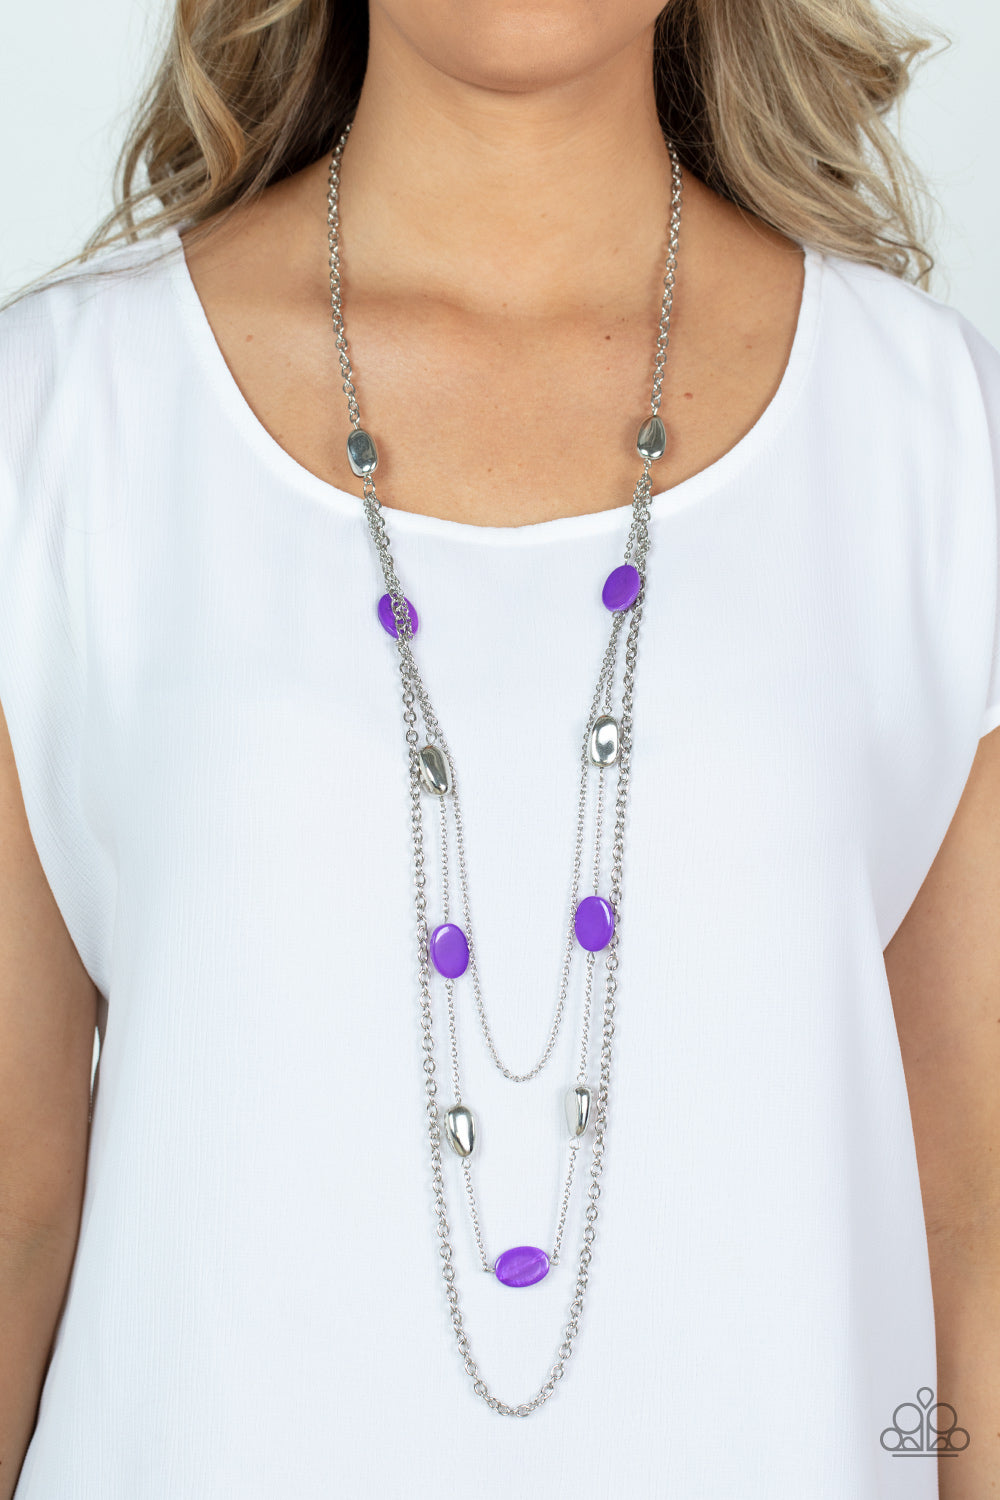 Paparazzi Necklaces - Barefoot and Beachbound - Purple